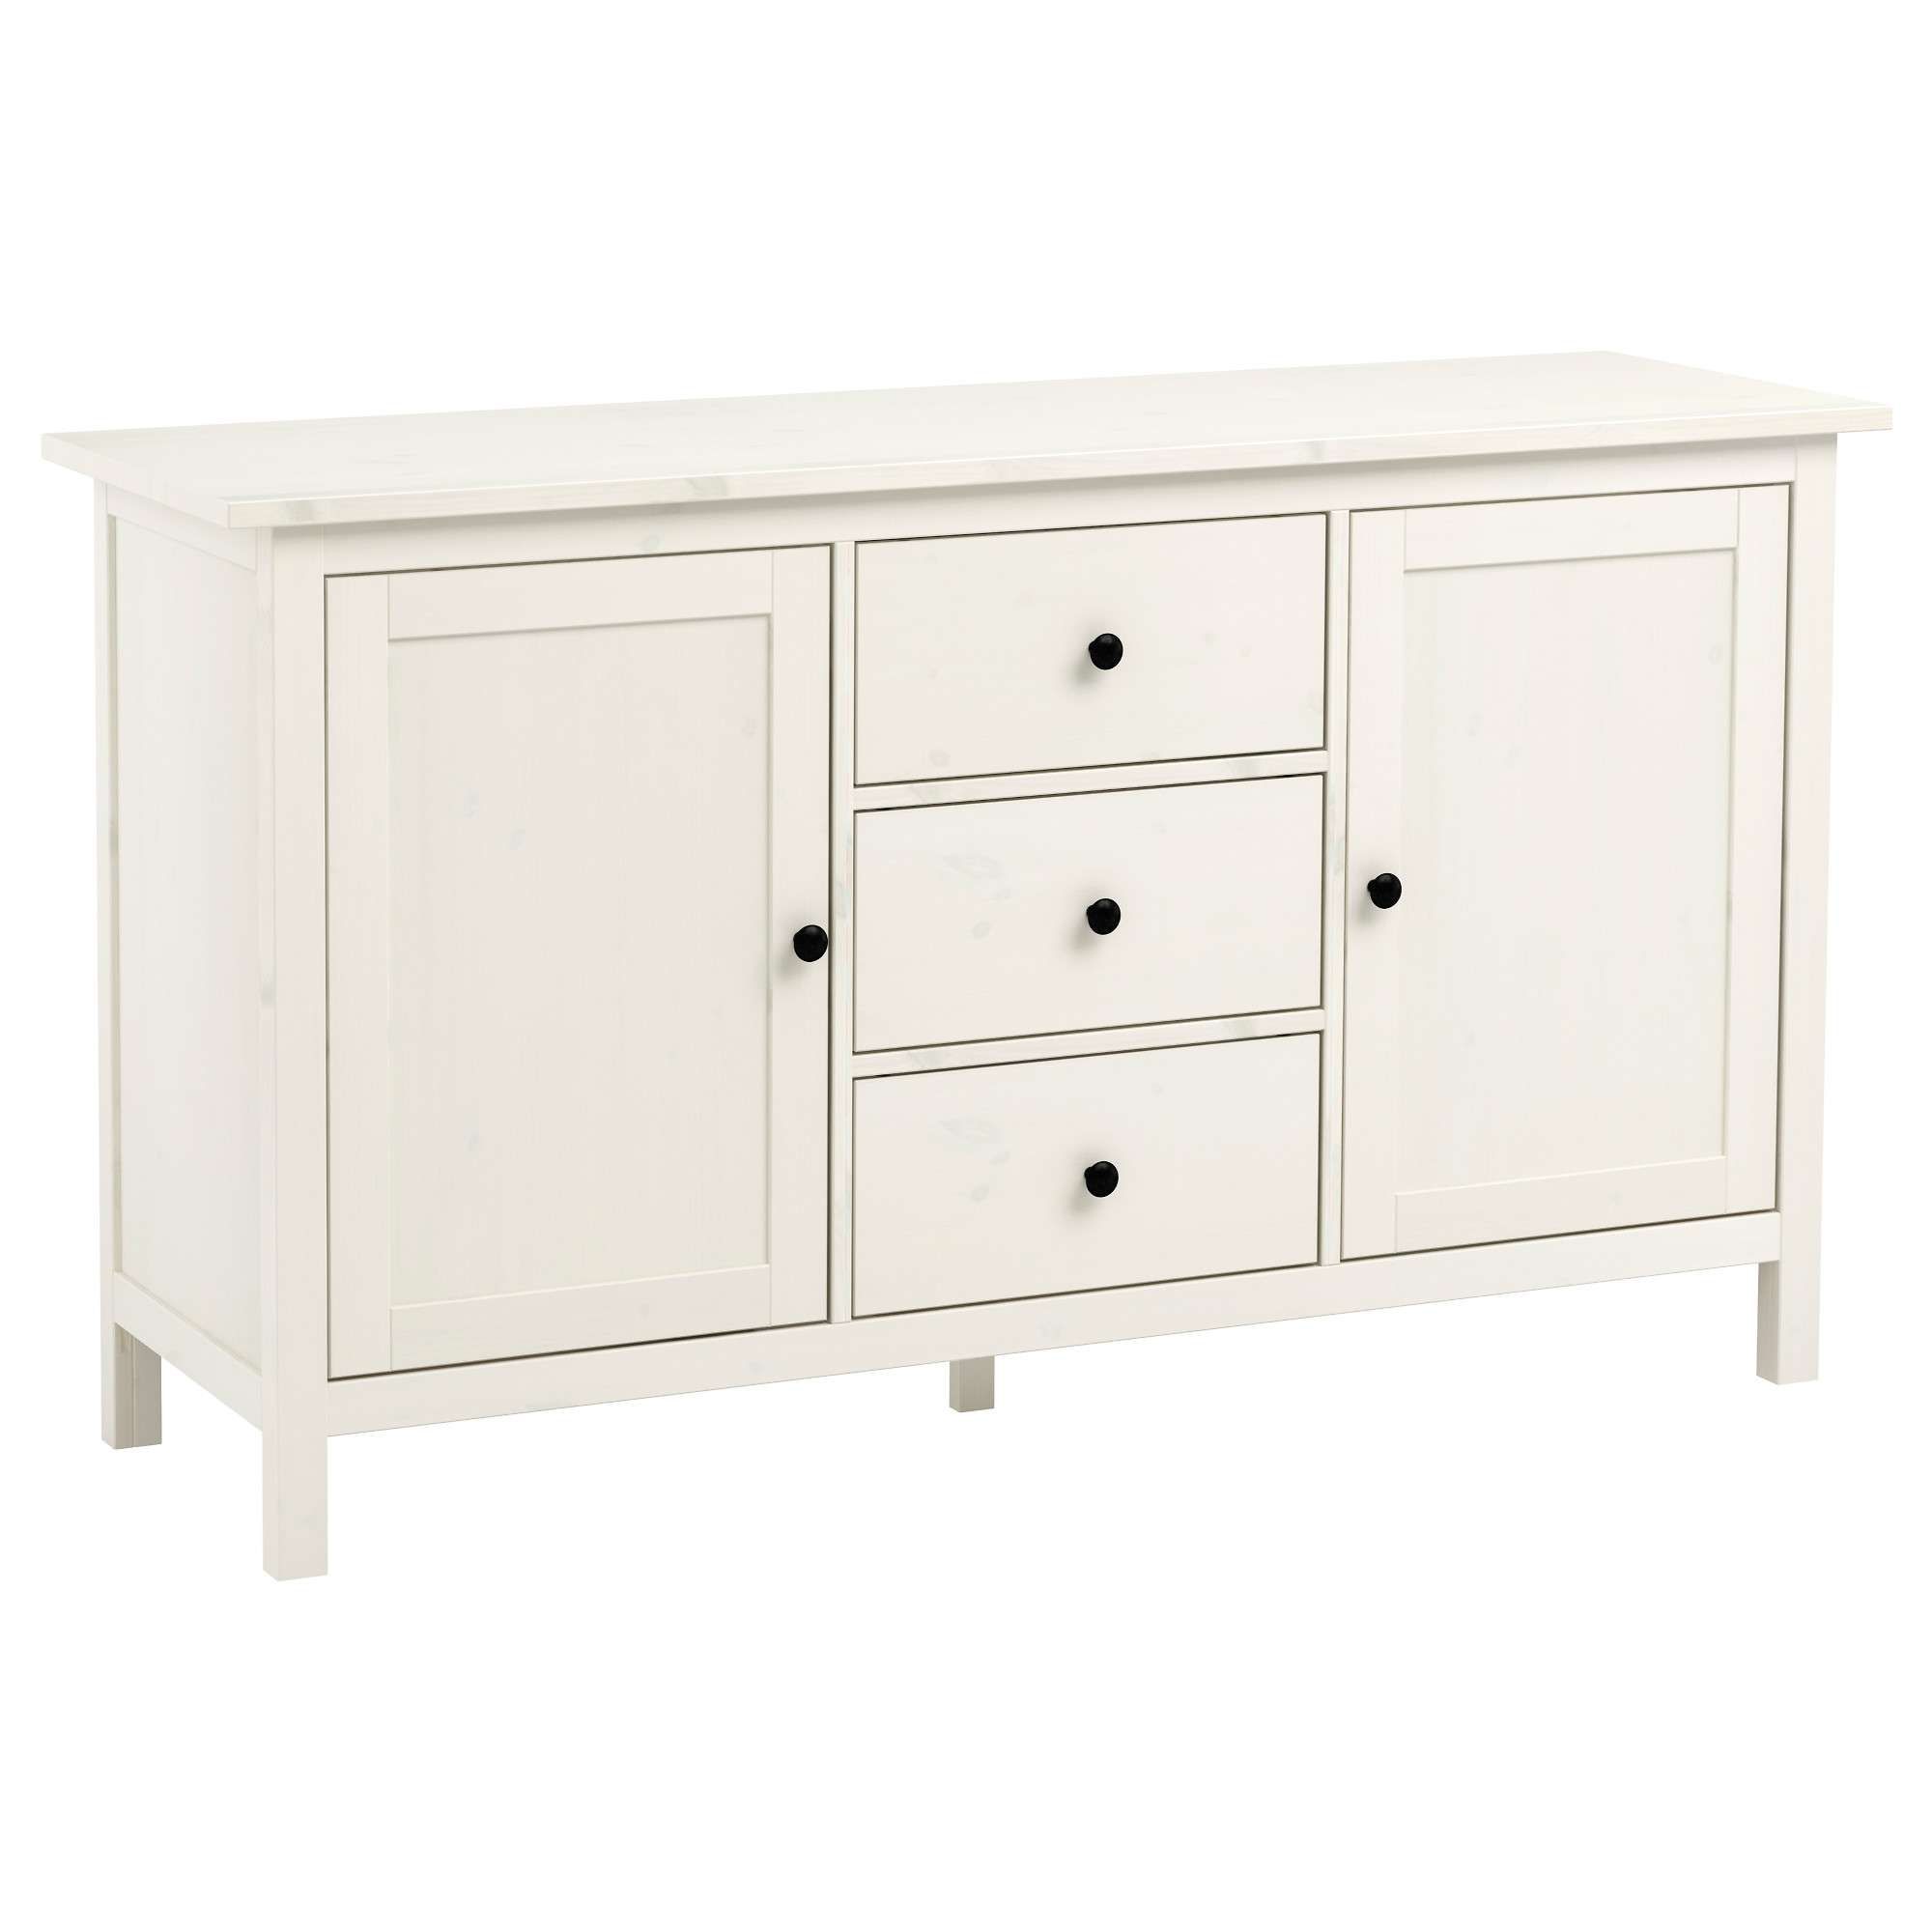 Hemnes Sideboard – White Stain – Ikea For Antique White Sideboards (View 4 of 20)